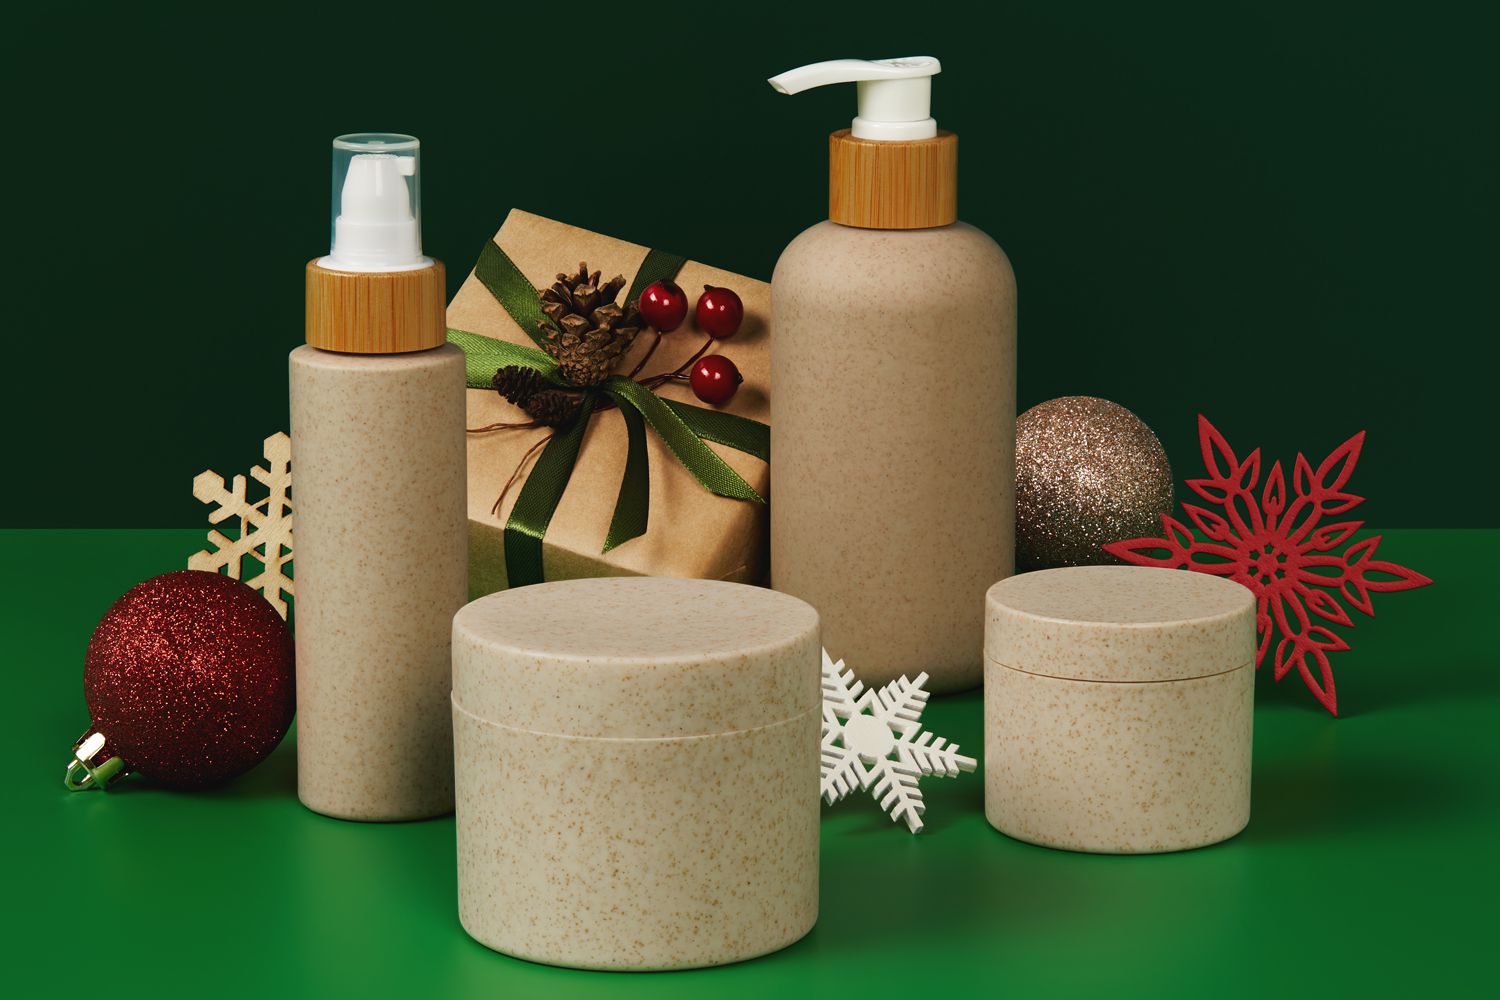 organic cosmetics packaging from natural materials on green table with wooden Christmas ornaments